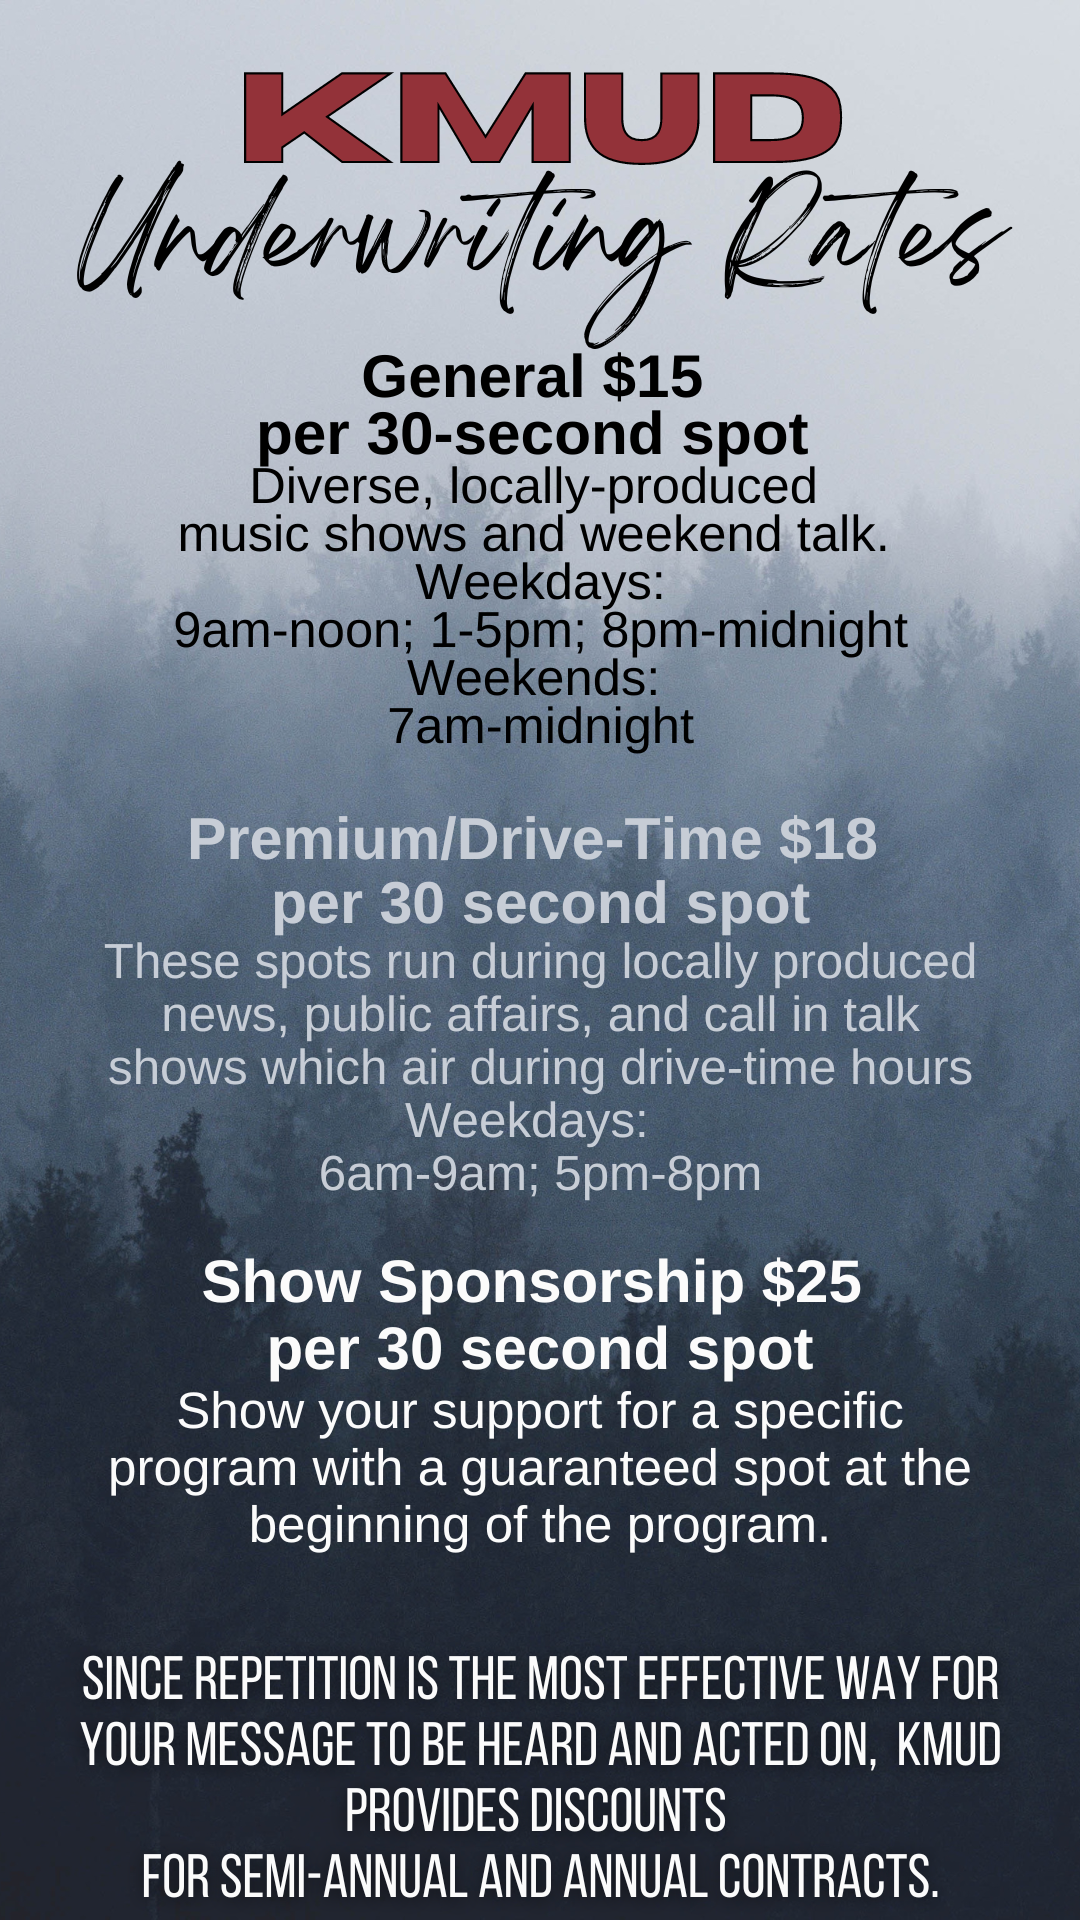 PremiumDrive-Time $18 These spots run during locally produced news, public affairs, and call in talk shows which air during drive-time hours Weekdays 6am-9am; 5pm-8pm